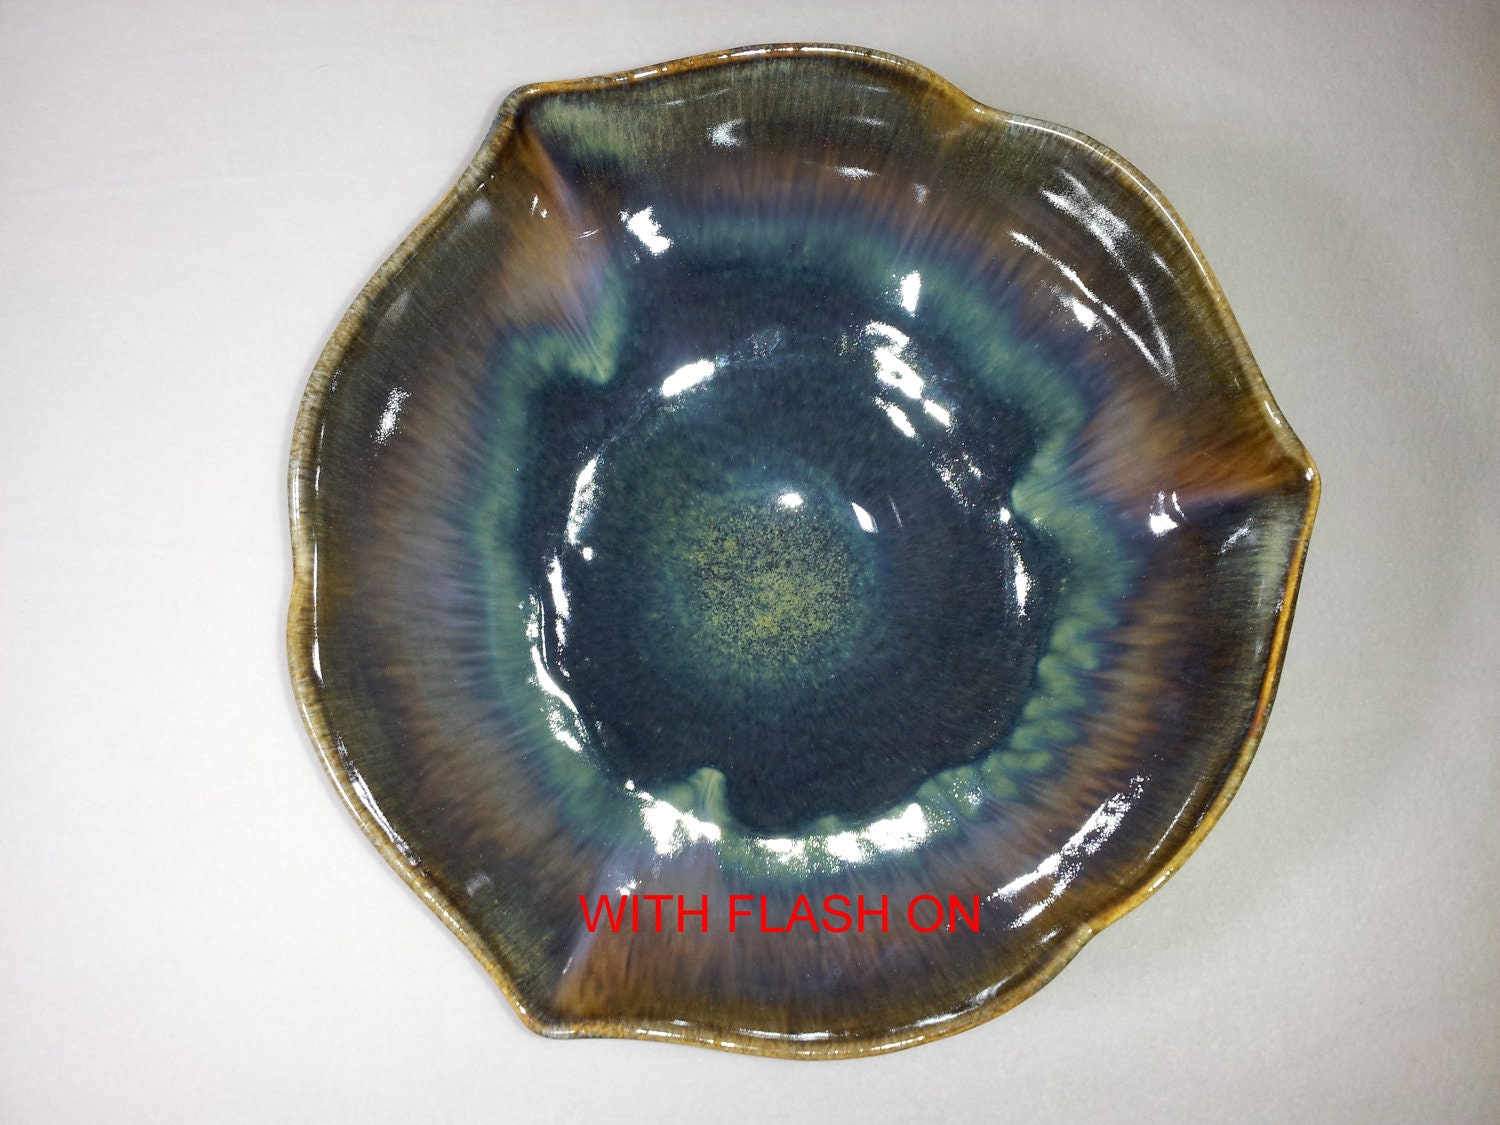 Colorful Drip Glaze Bowl and Vase - I Love This Set